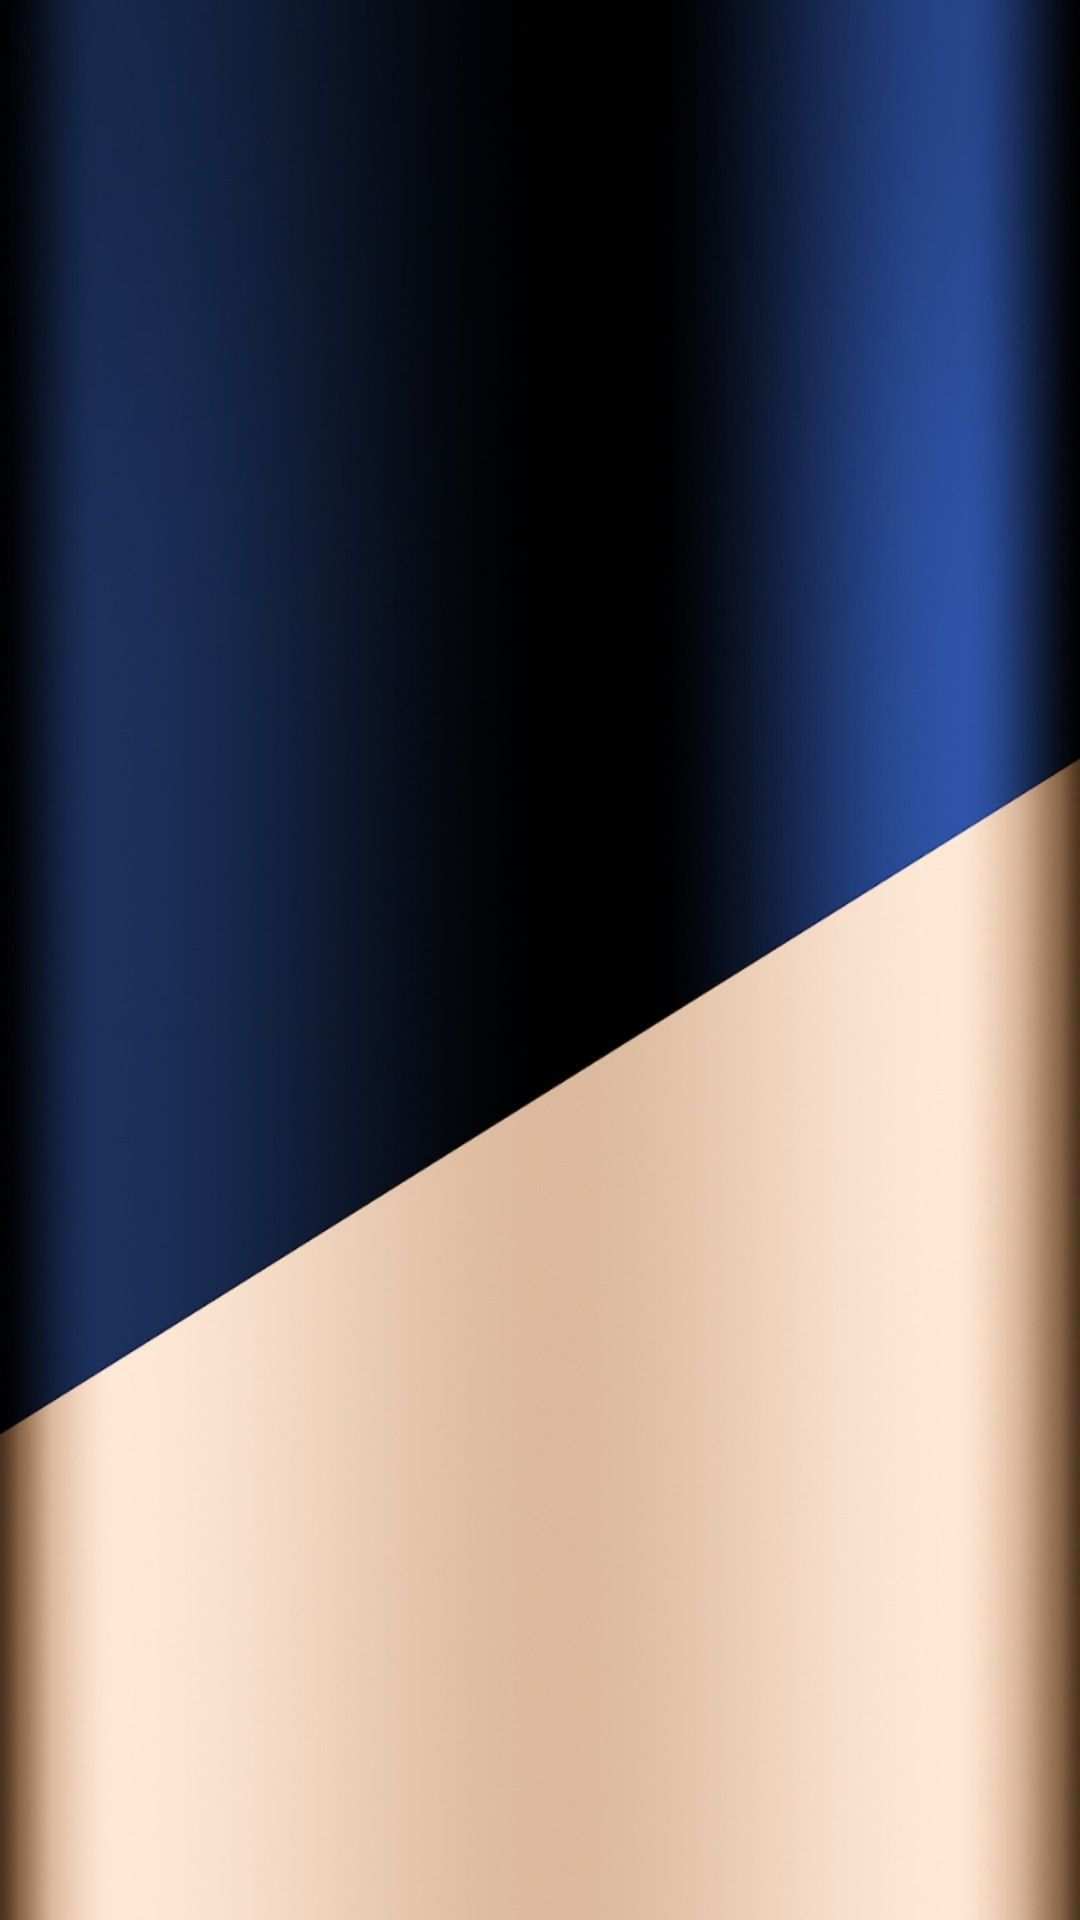 Navy Blue And Gold Wallpaper Android Download Blue And Gold Wallpaper Samsung Wallpaper Gold Wallpaper